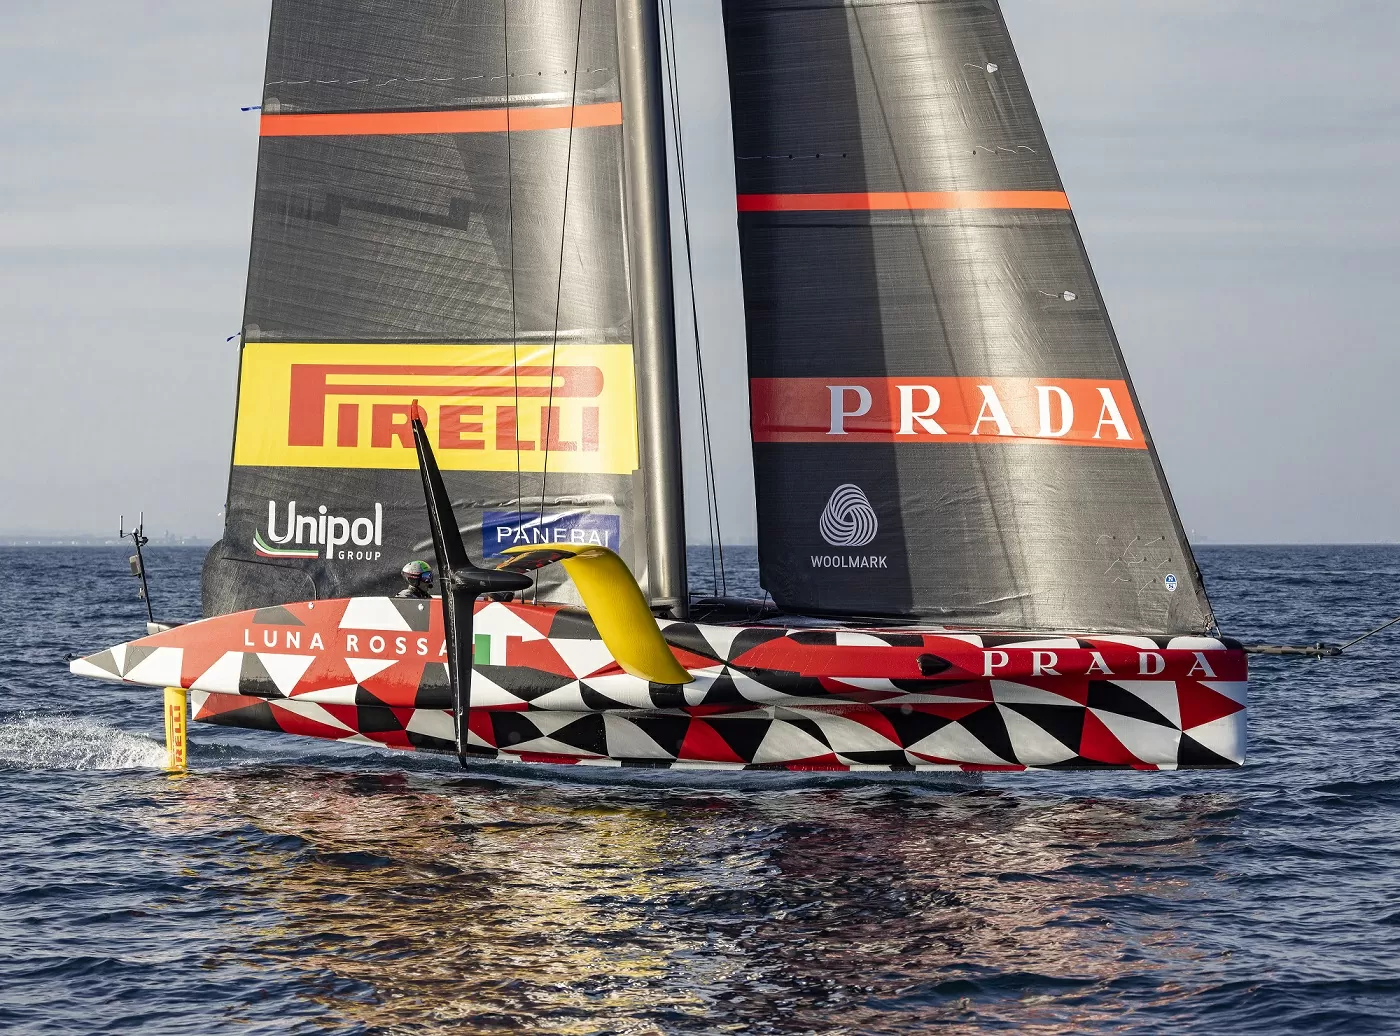 LUNA ROSSA PROTOTYPE is sailing the innovation, The challange is started